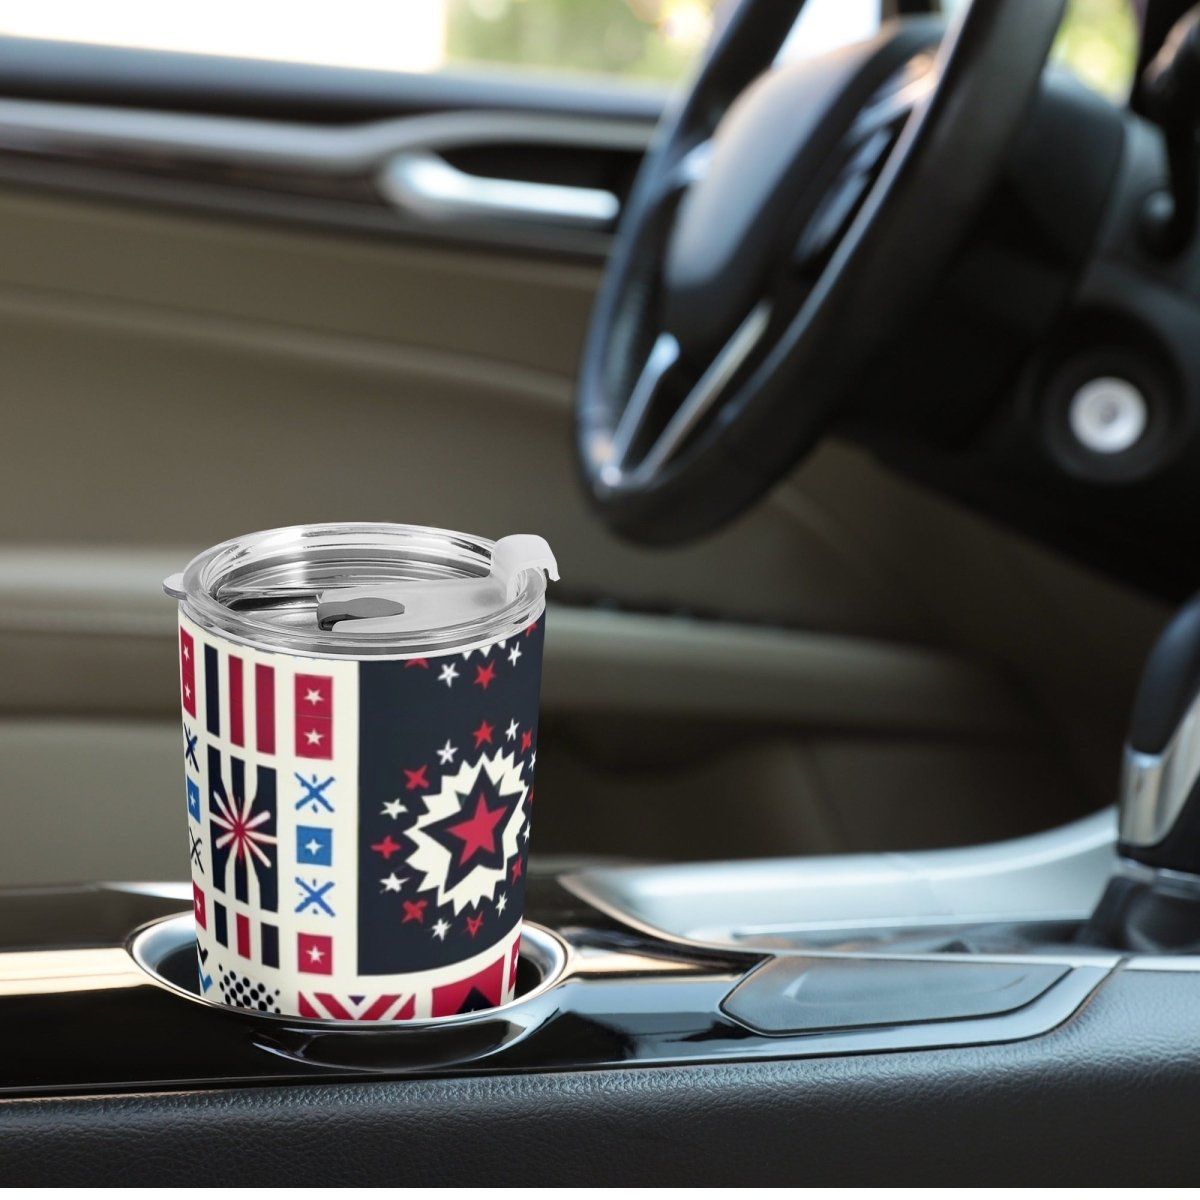 Stylish Printed Car Cup - Perfect for On-The-Go Sipping - Iron Phoenix GHG